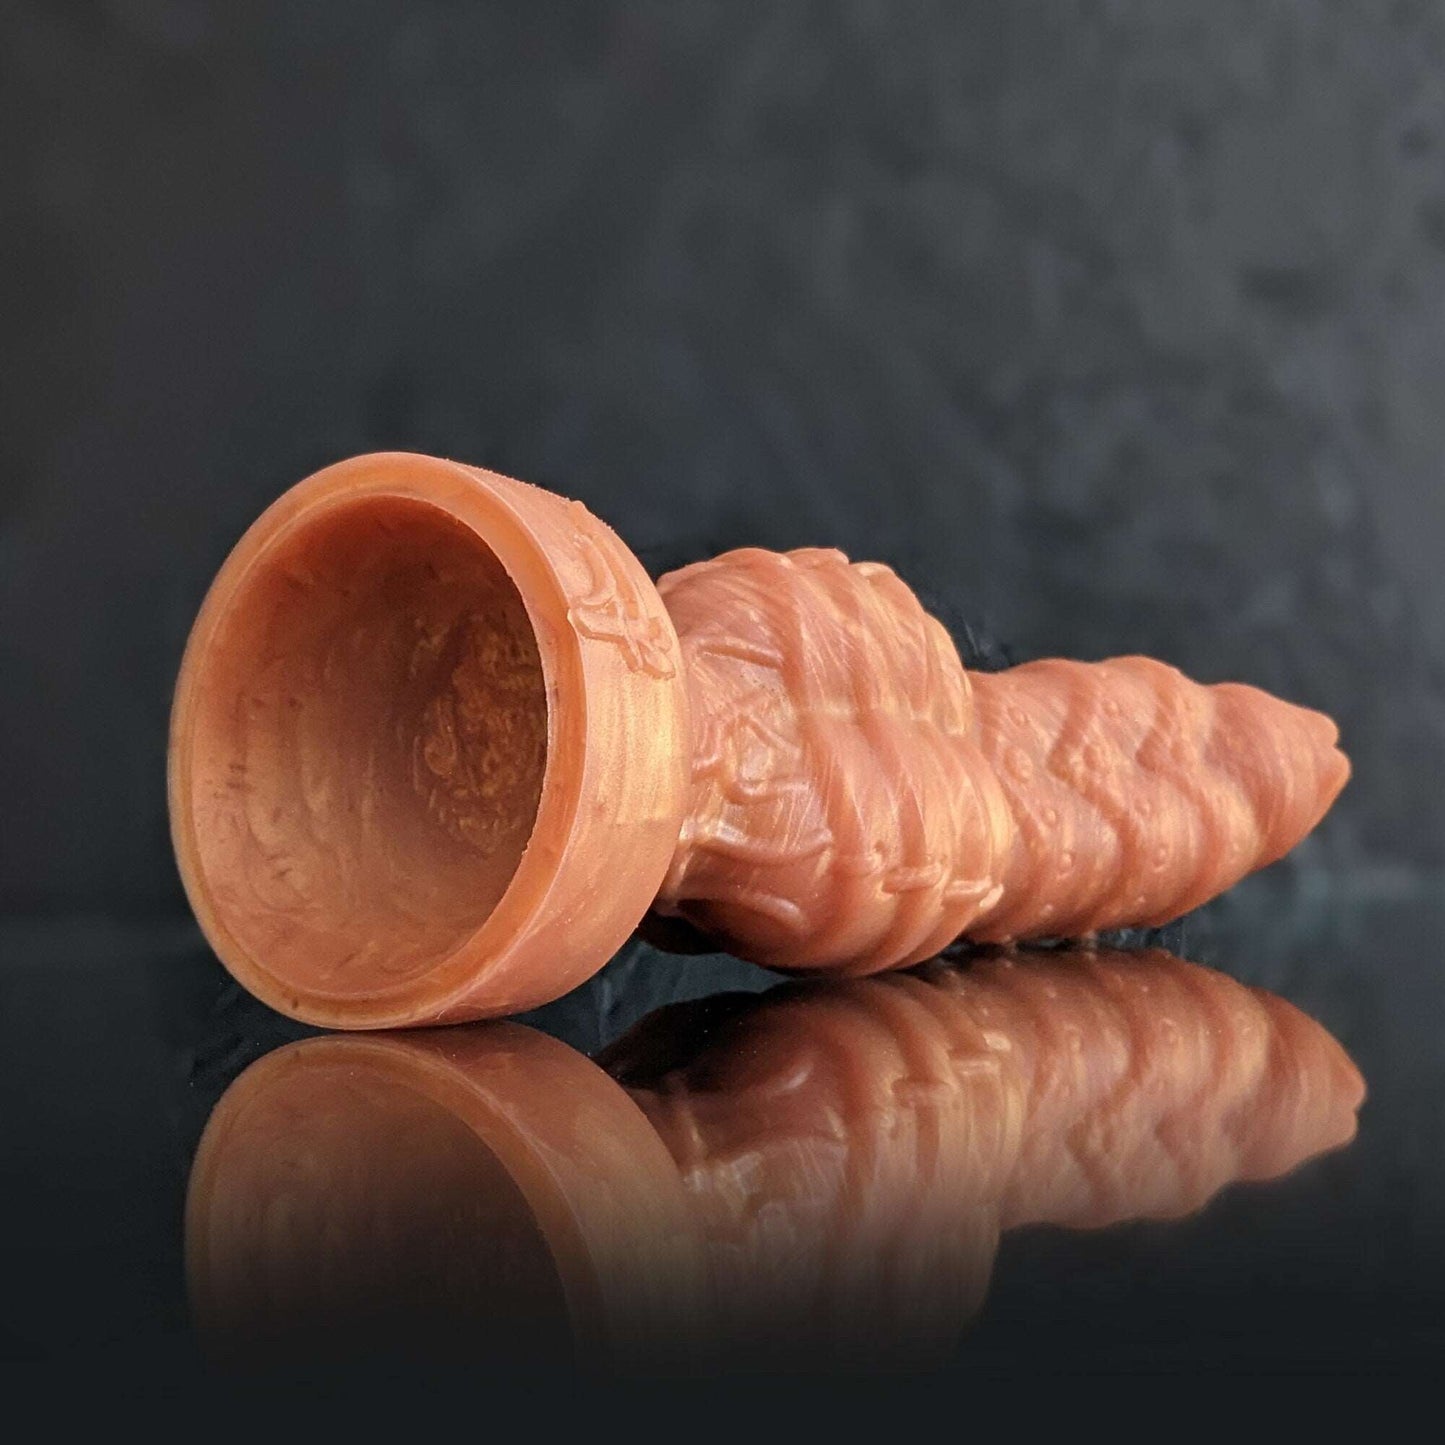 Reduced - Knot dildo | Fantasy Gifts | Adult Toys | | Fantasy sex toys | Flexible Knot Dildo | knotted dildo | Safe Platinum Silicone | suction cup